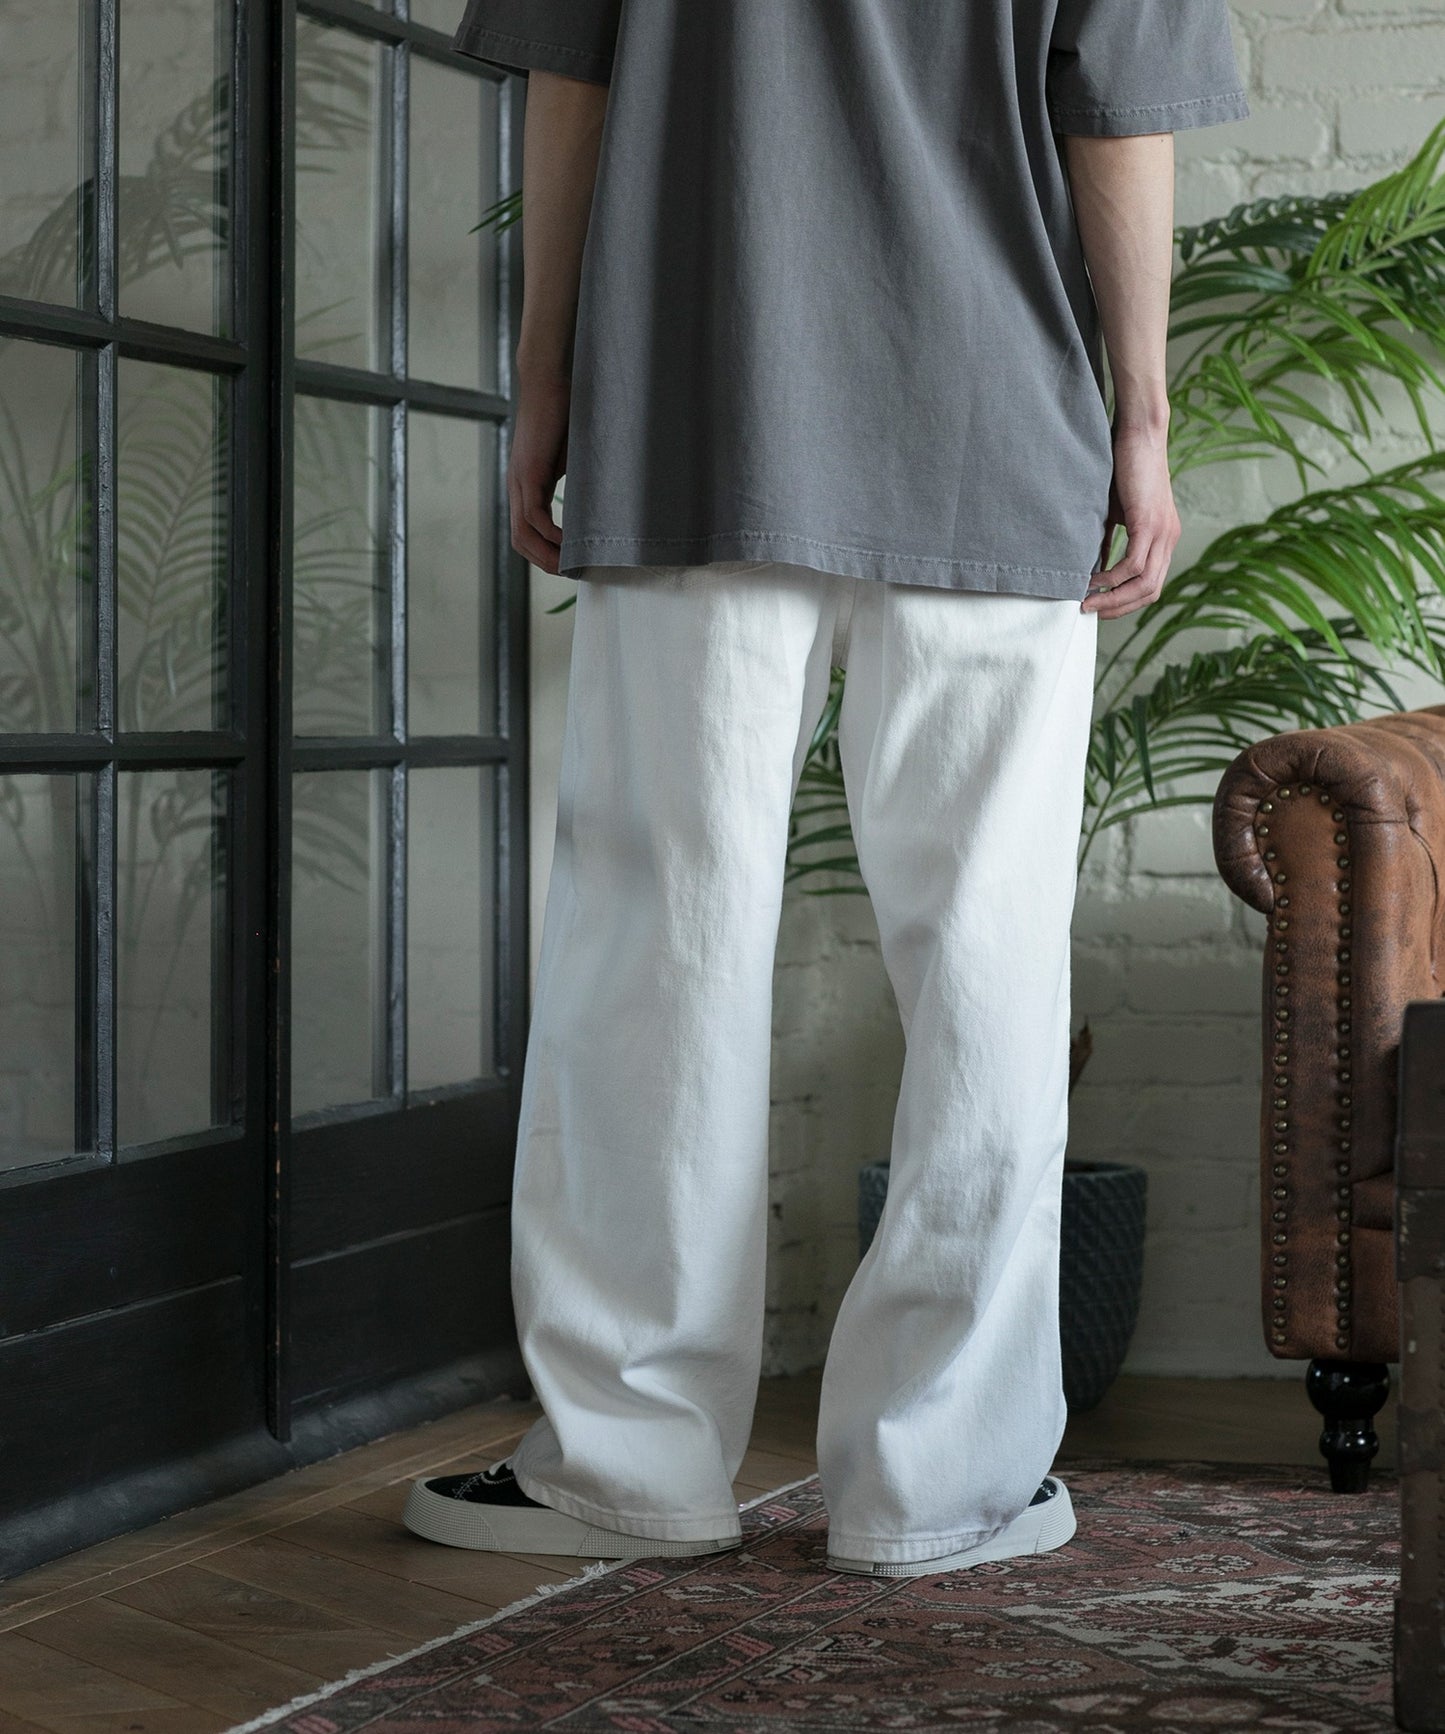 【aimoha neo】CHIC URBANITE RELAXED FIT DISTRESSED DENIM